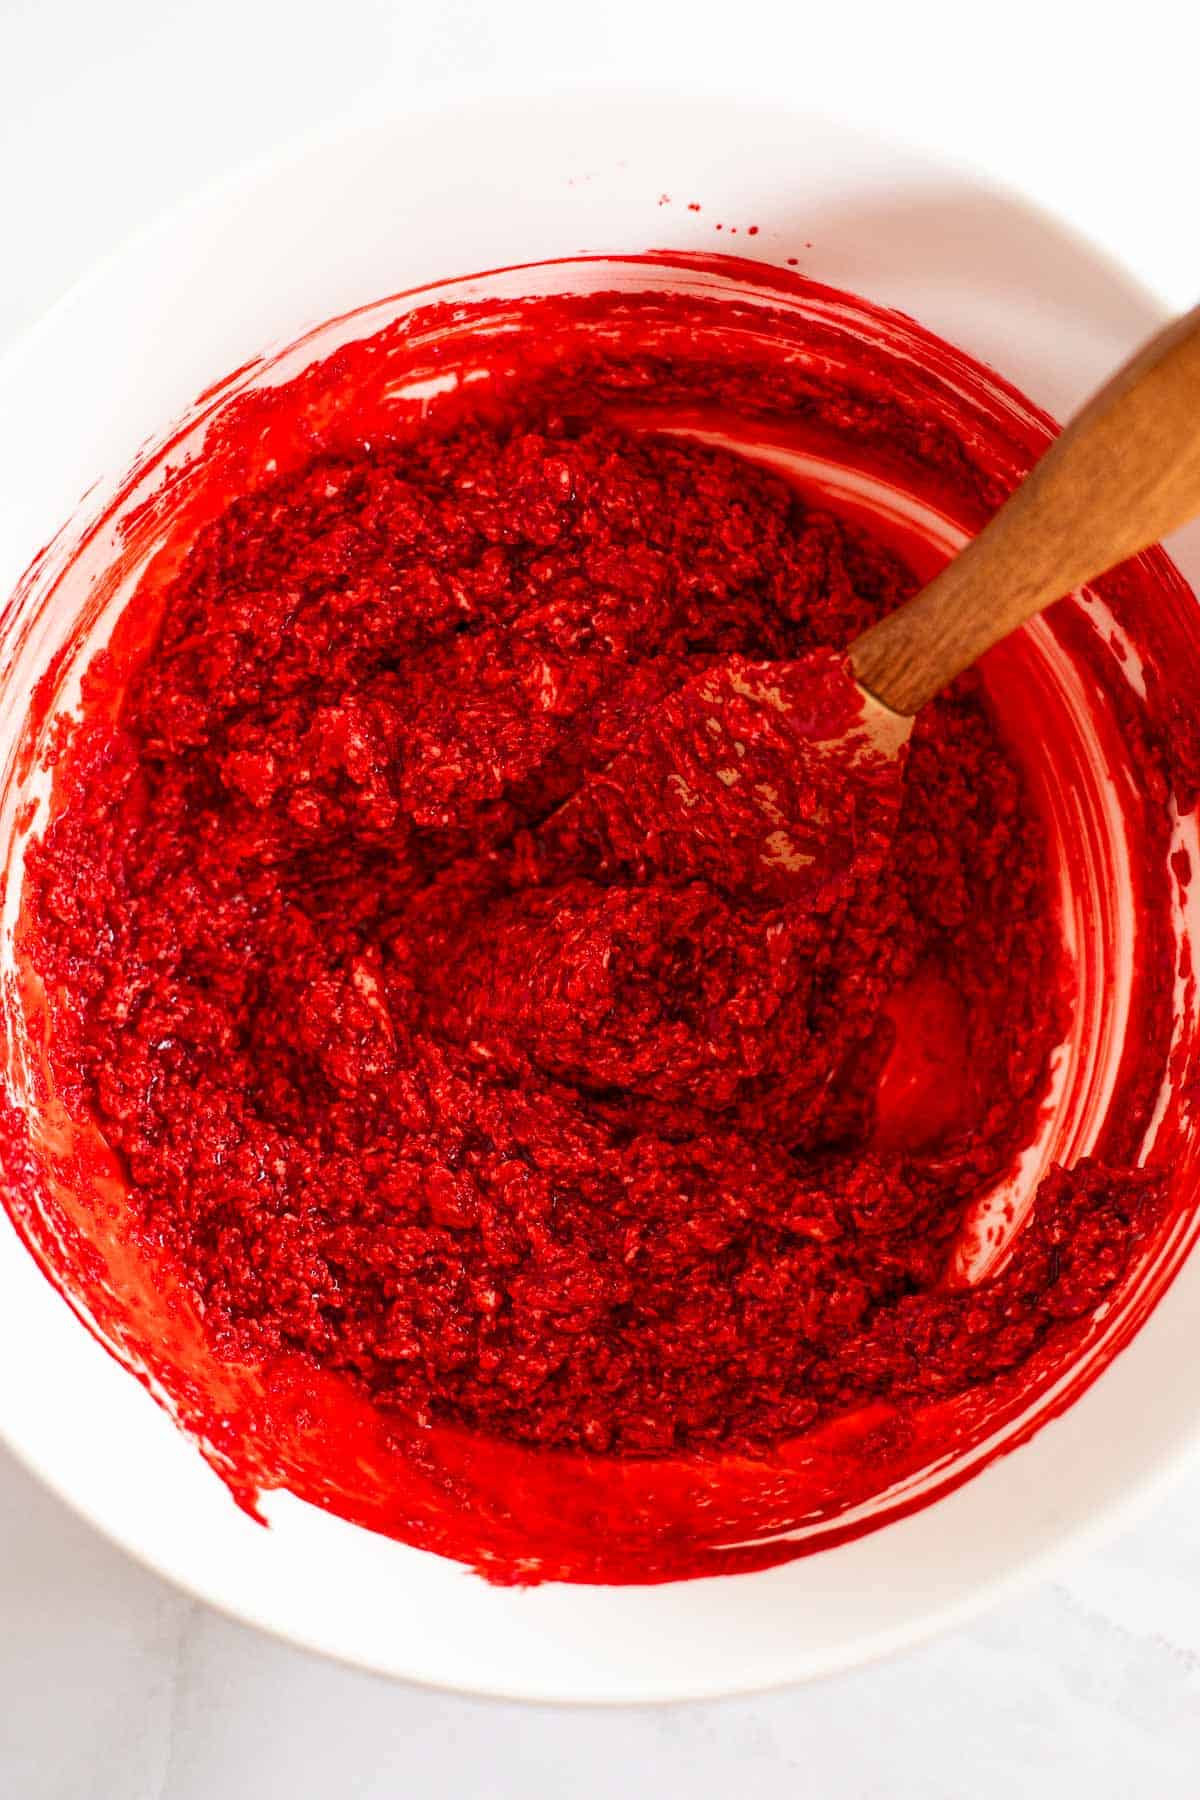 butter mixed with red food dye and sugar in a white bowl.